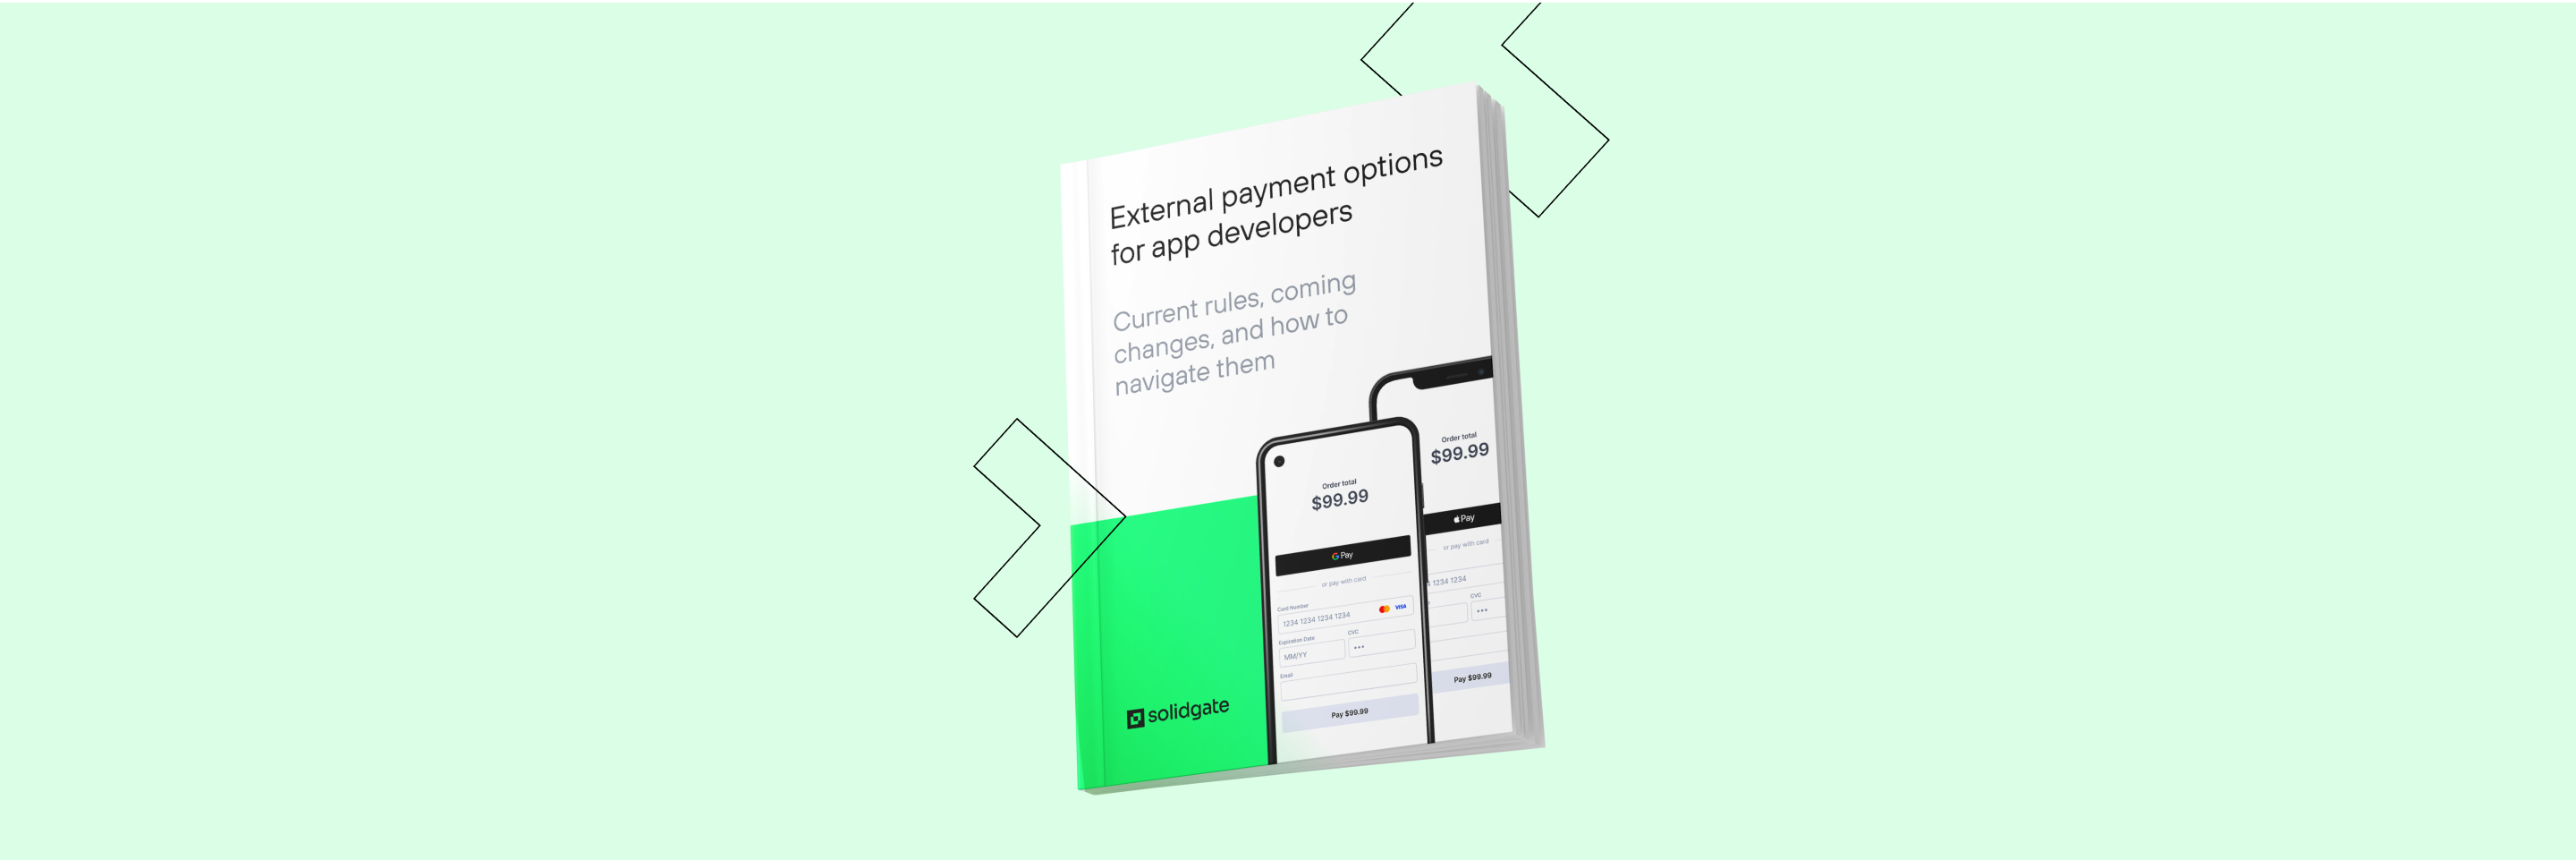 In-Depth Report: External Payment Options for App Developers